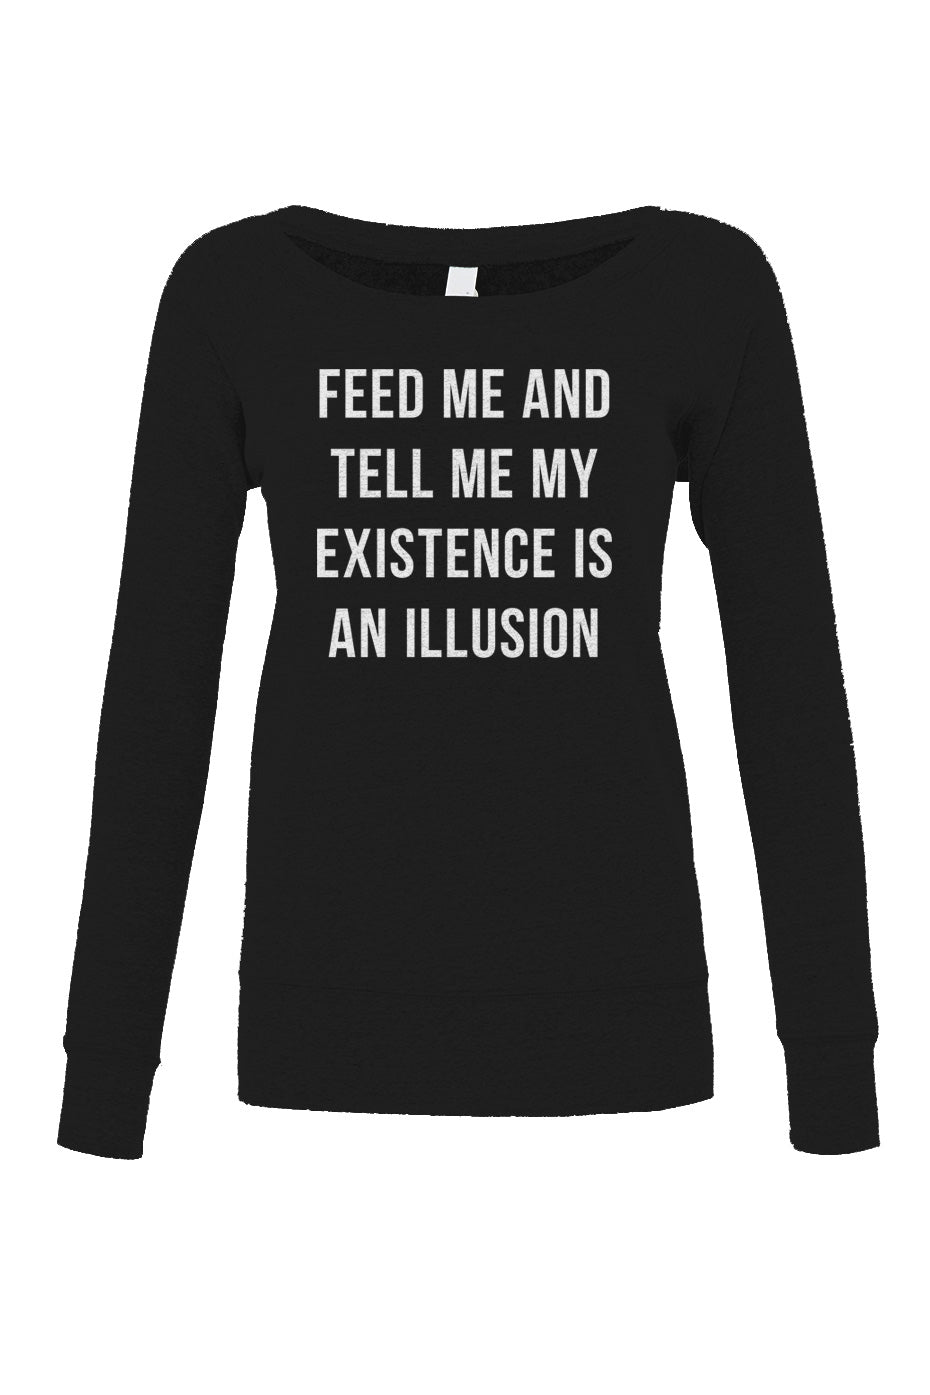 Women's Feed Me and Tell Me My Existence is an Illusion Scoop Neck Fleece - Existentialism Shirt